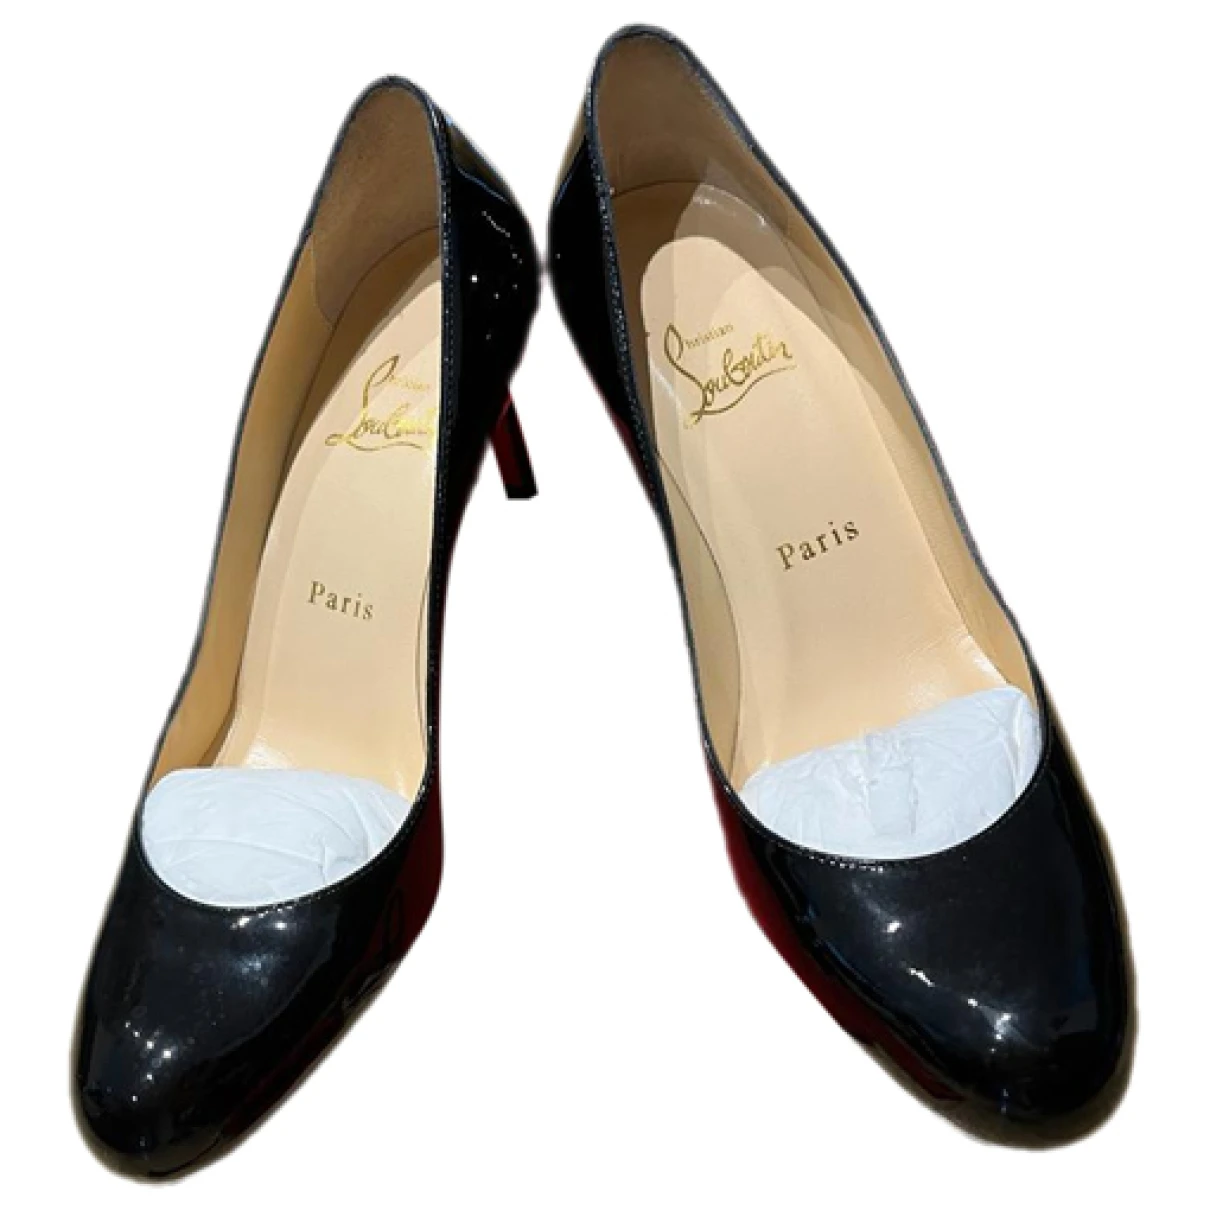 shoes Christian Louboutin heels Simple pump for Female Patent leather 37.5 EU. Used condition